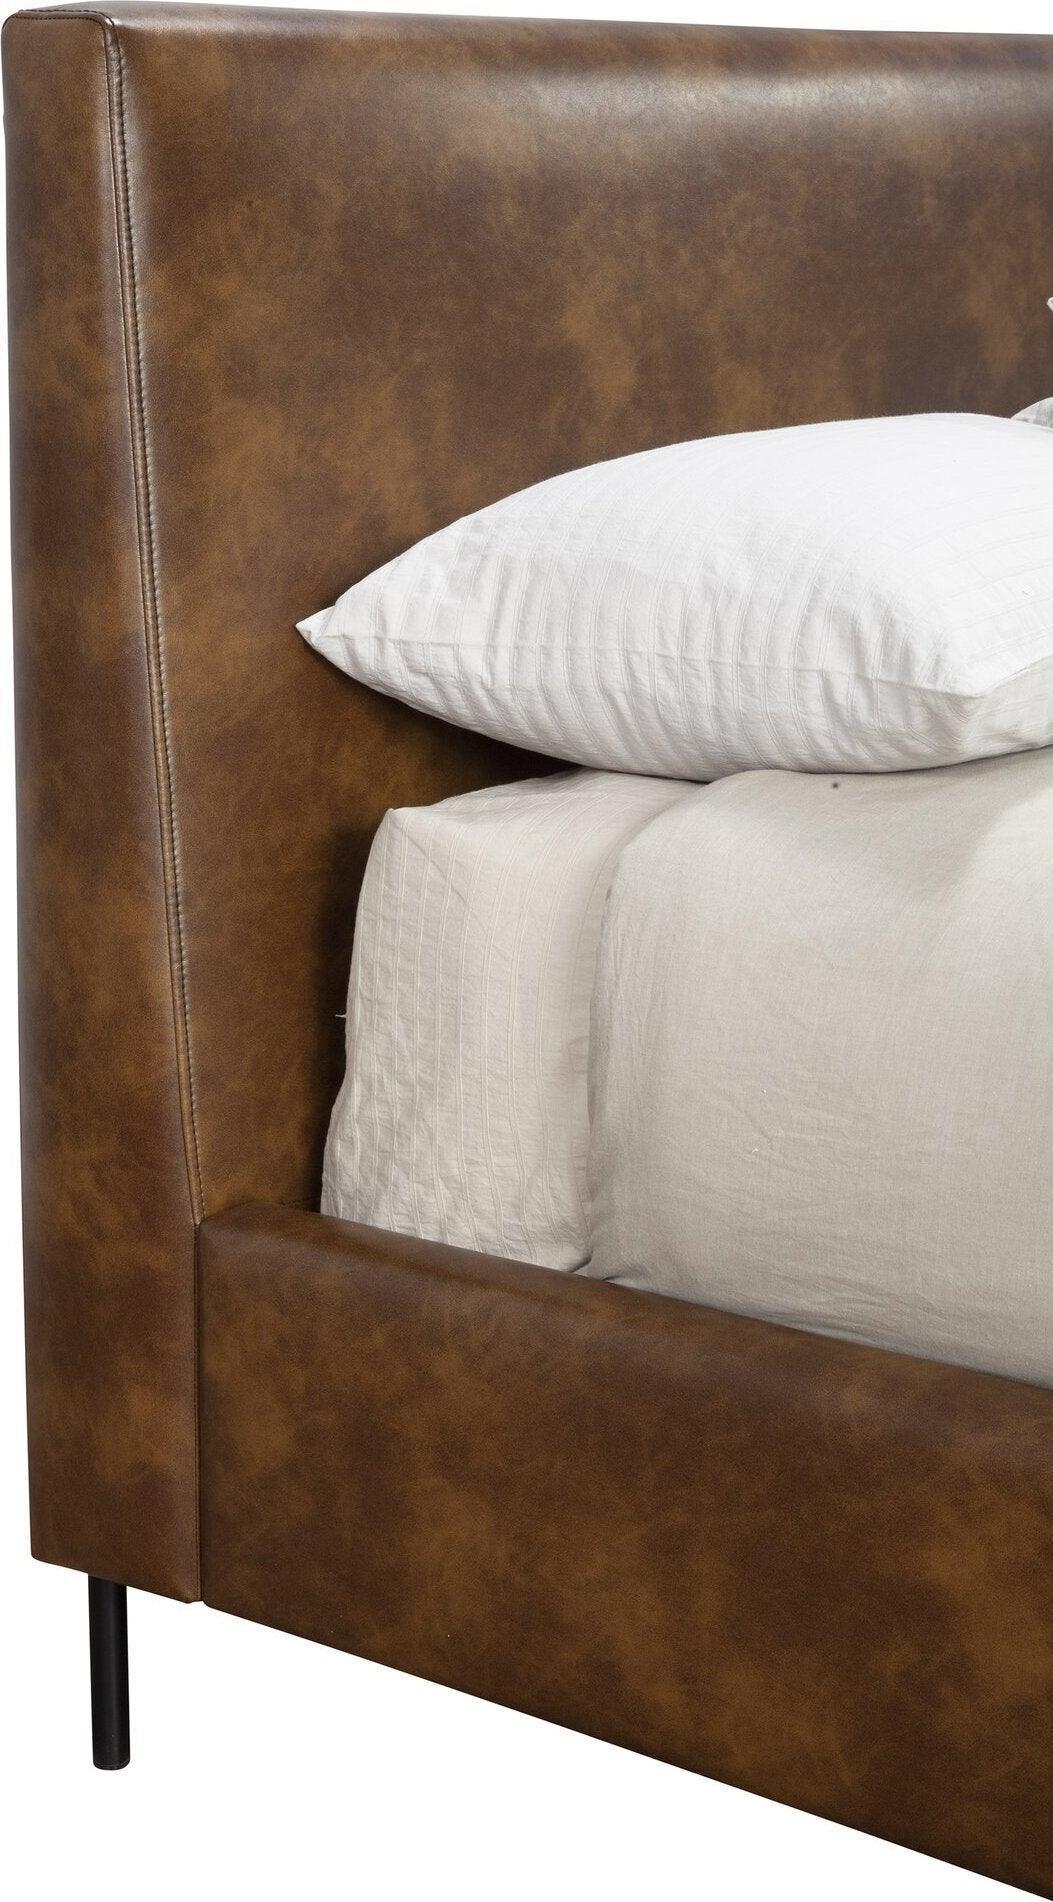 Alpine Furniture Beds - Sophia Faux Leather Standard King Bed Brown